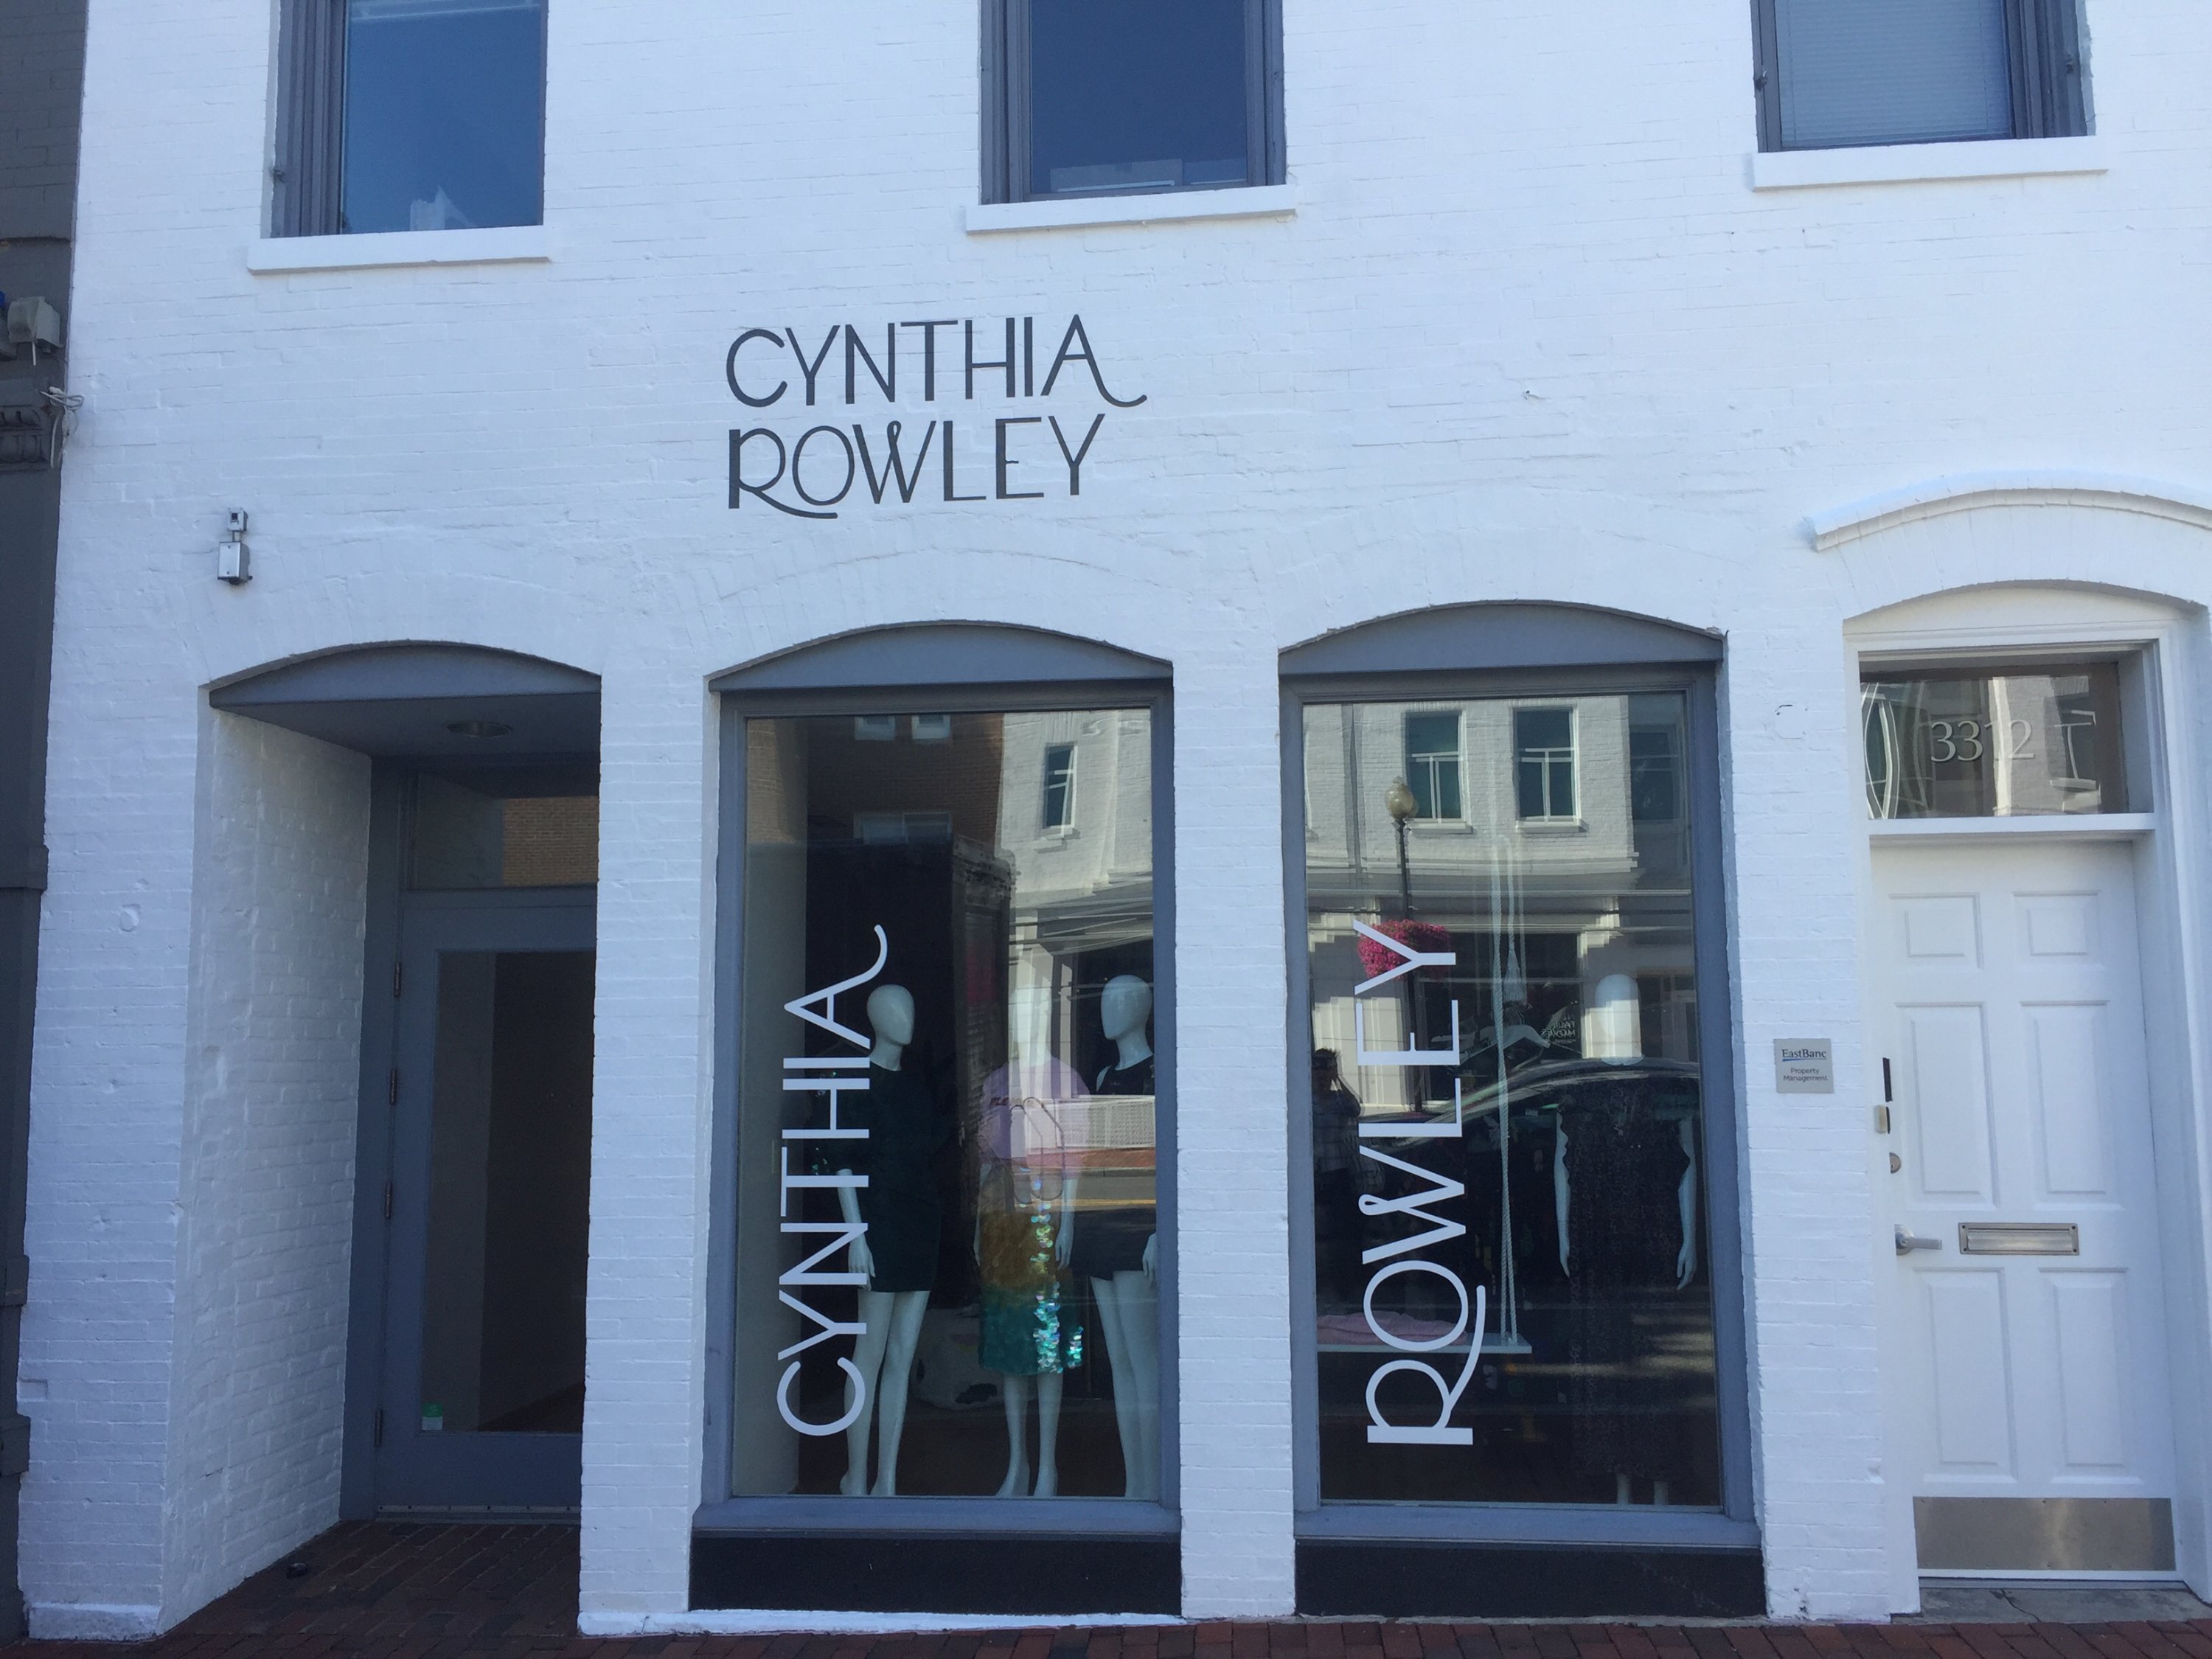 The recently opened Cynthia Rowley store in Georgetown. Photo by Helen Carefoot.